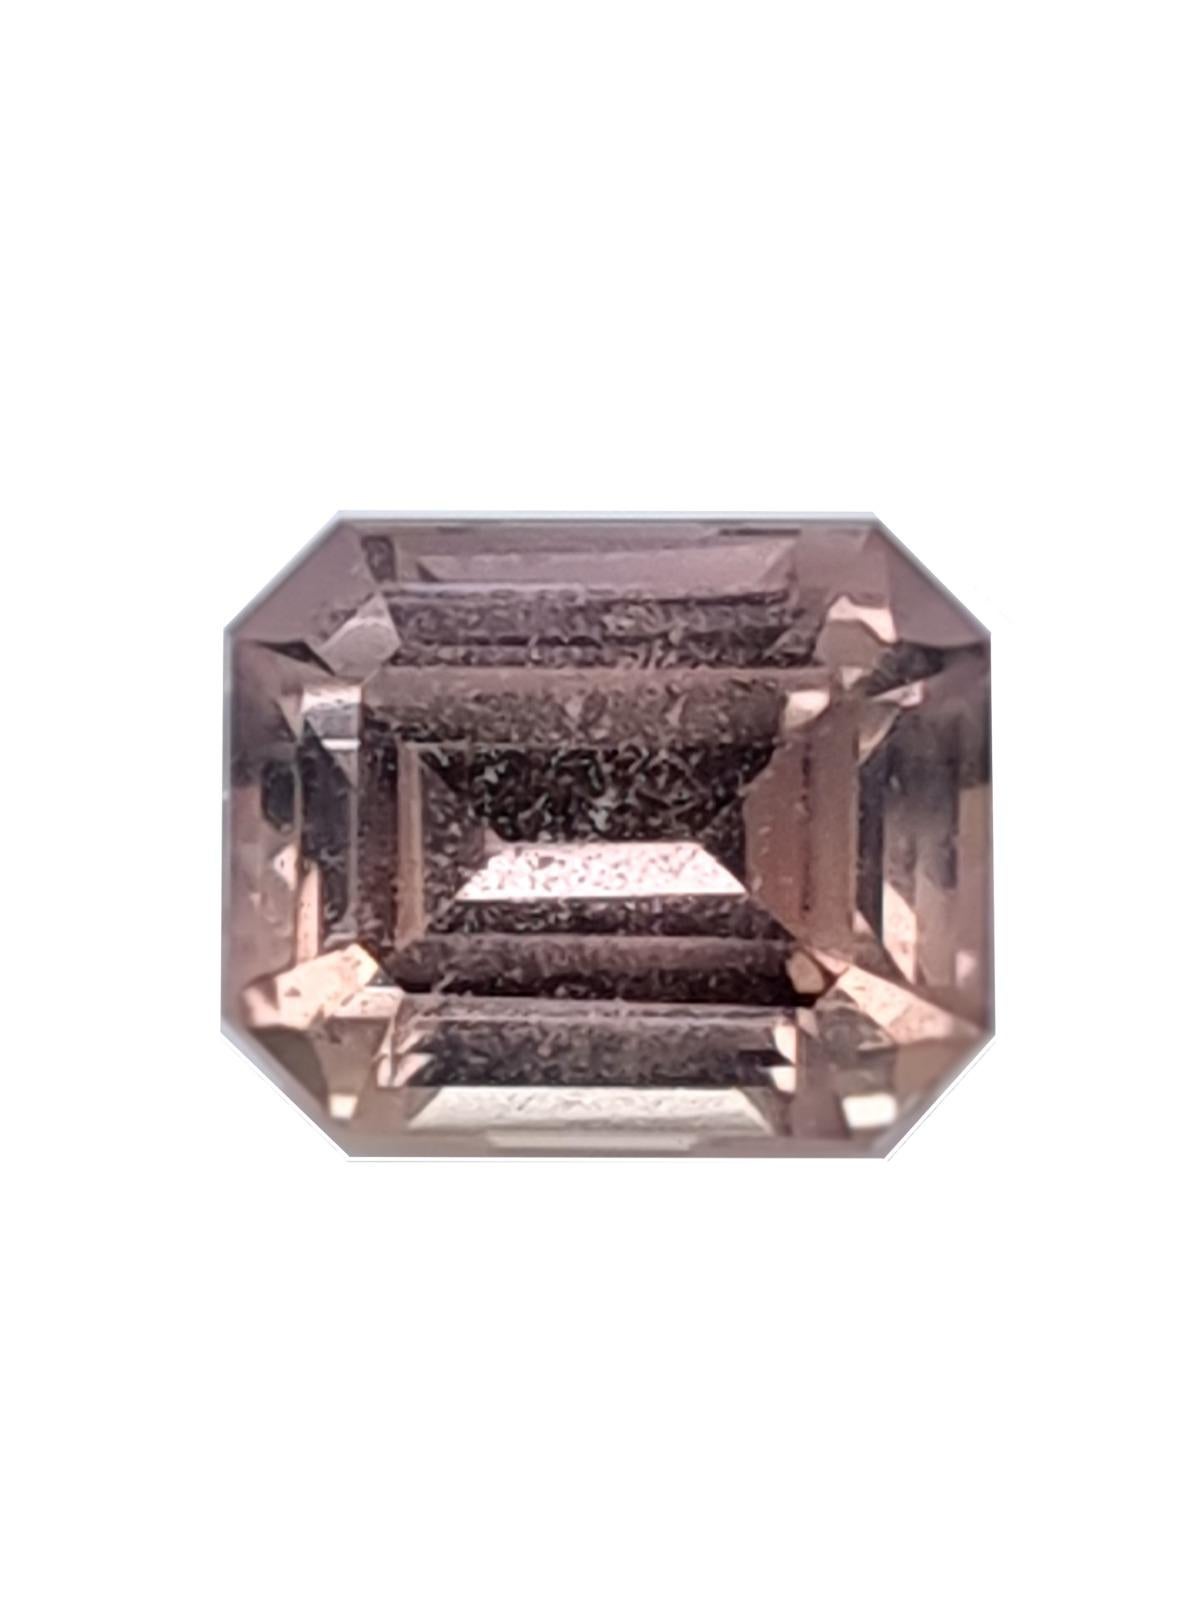 One-of-a-kind emerald cut, champagne-to-blush pink sapphire: 10 x 8 mm / 4.71 carat

This beautifully crafted sapphire is notable for its distinct and desirable colour change. 

In daylight exhibiting a champagne-like yellow primary hue. At night